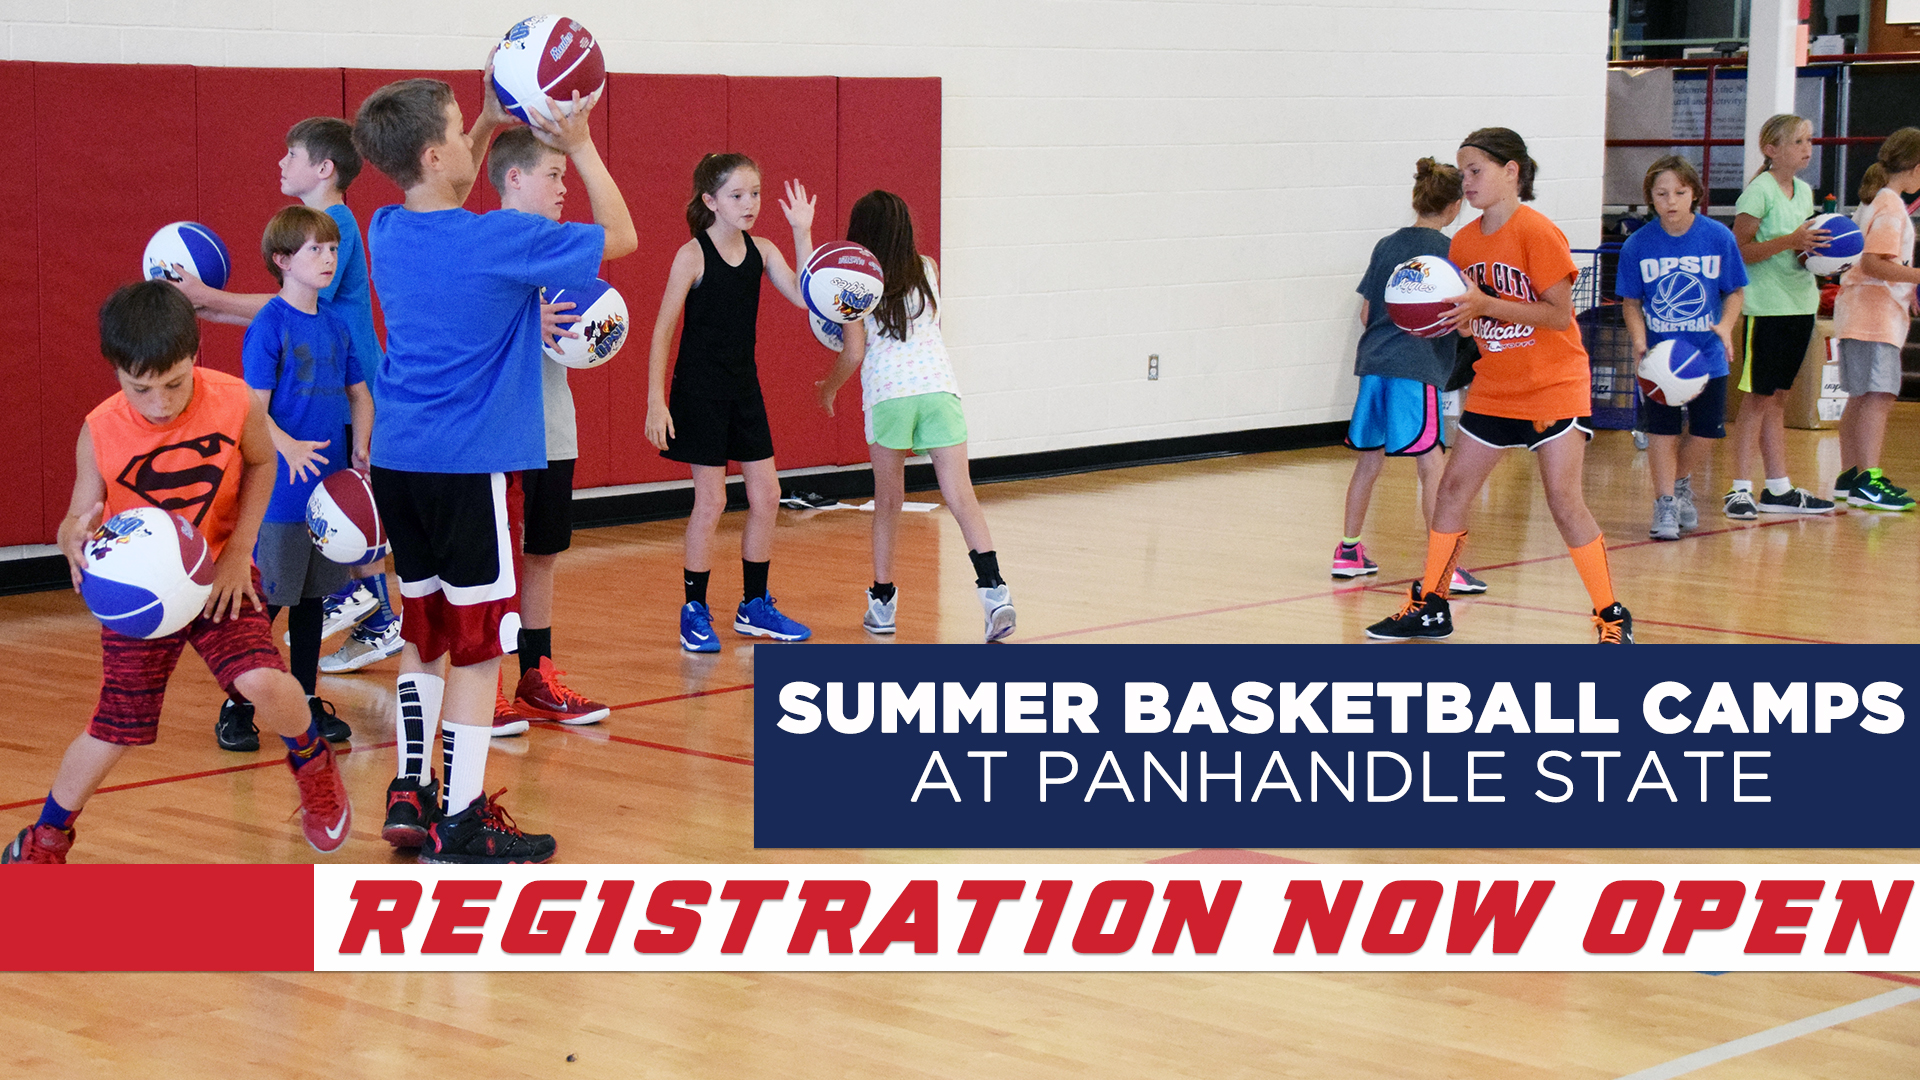 Panhandle State Hosts Summer Basketball Camps